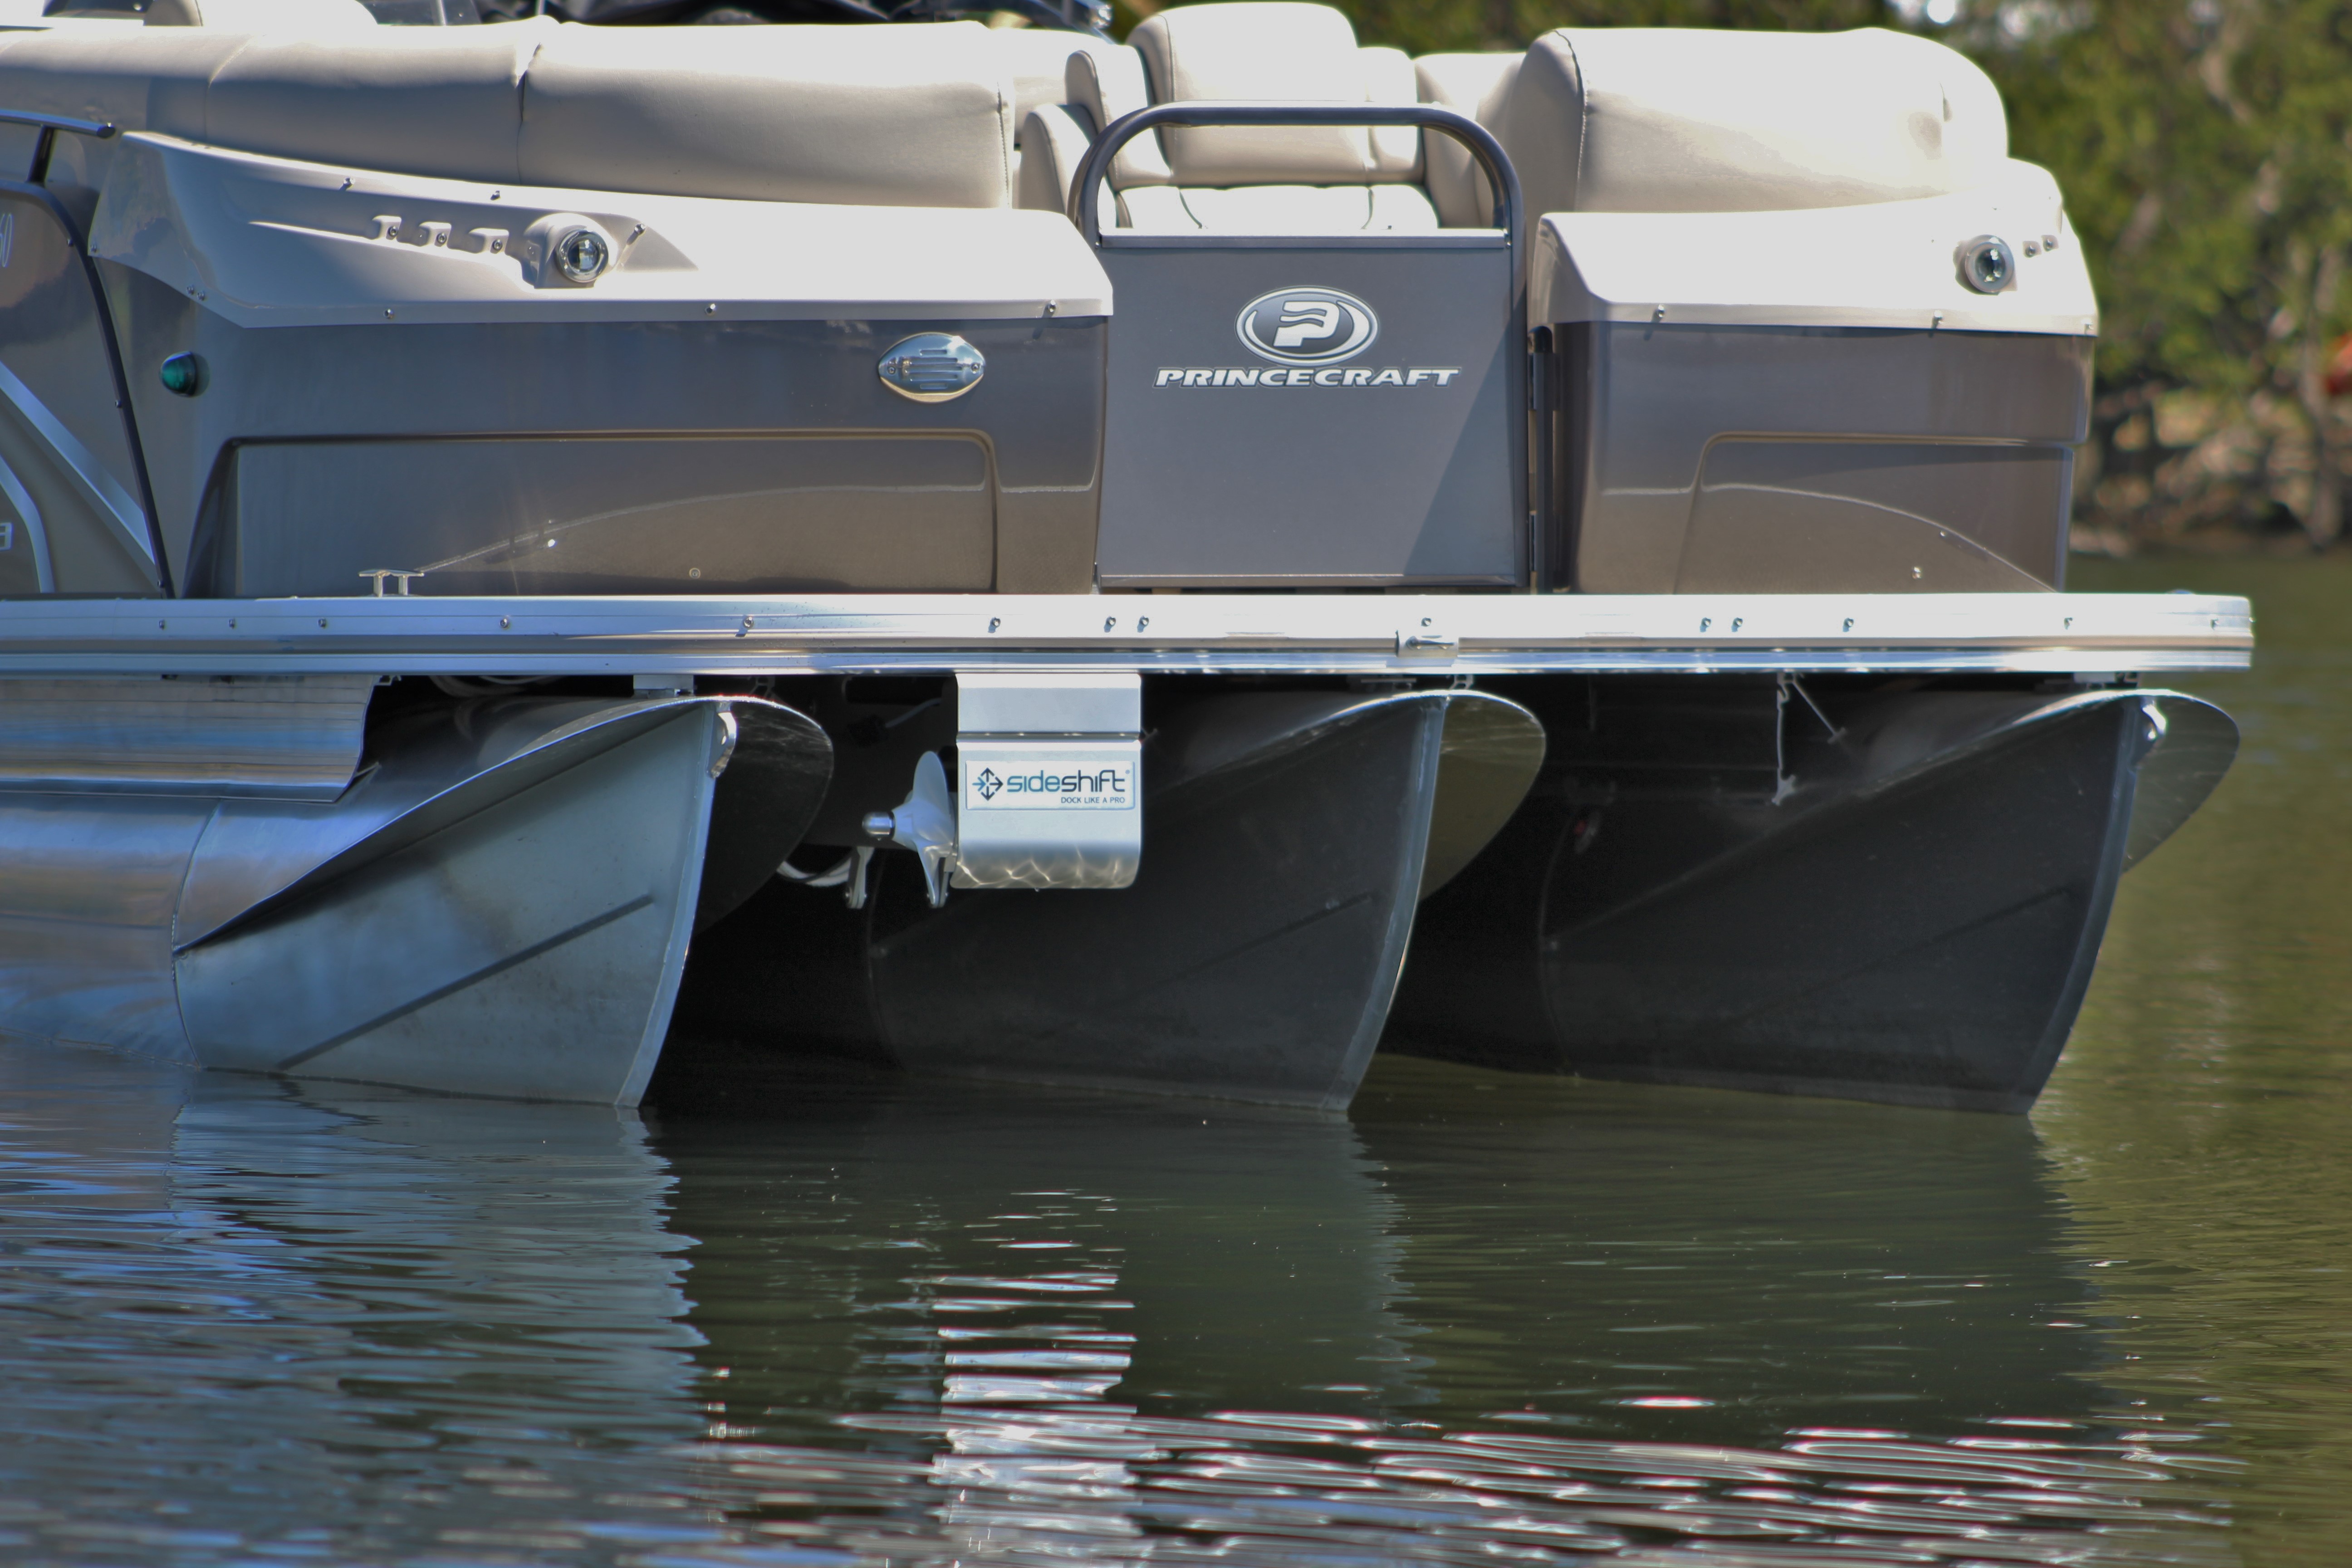 Sideshift Pt230 Bow Thruster For Pontoon Style Boats Up To 35 Boat With Wireless Joystick Helm Control